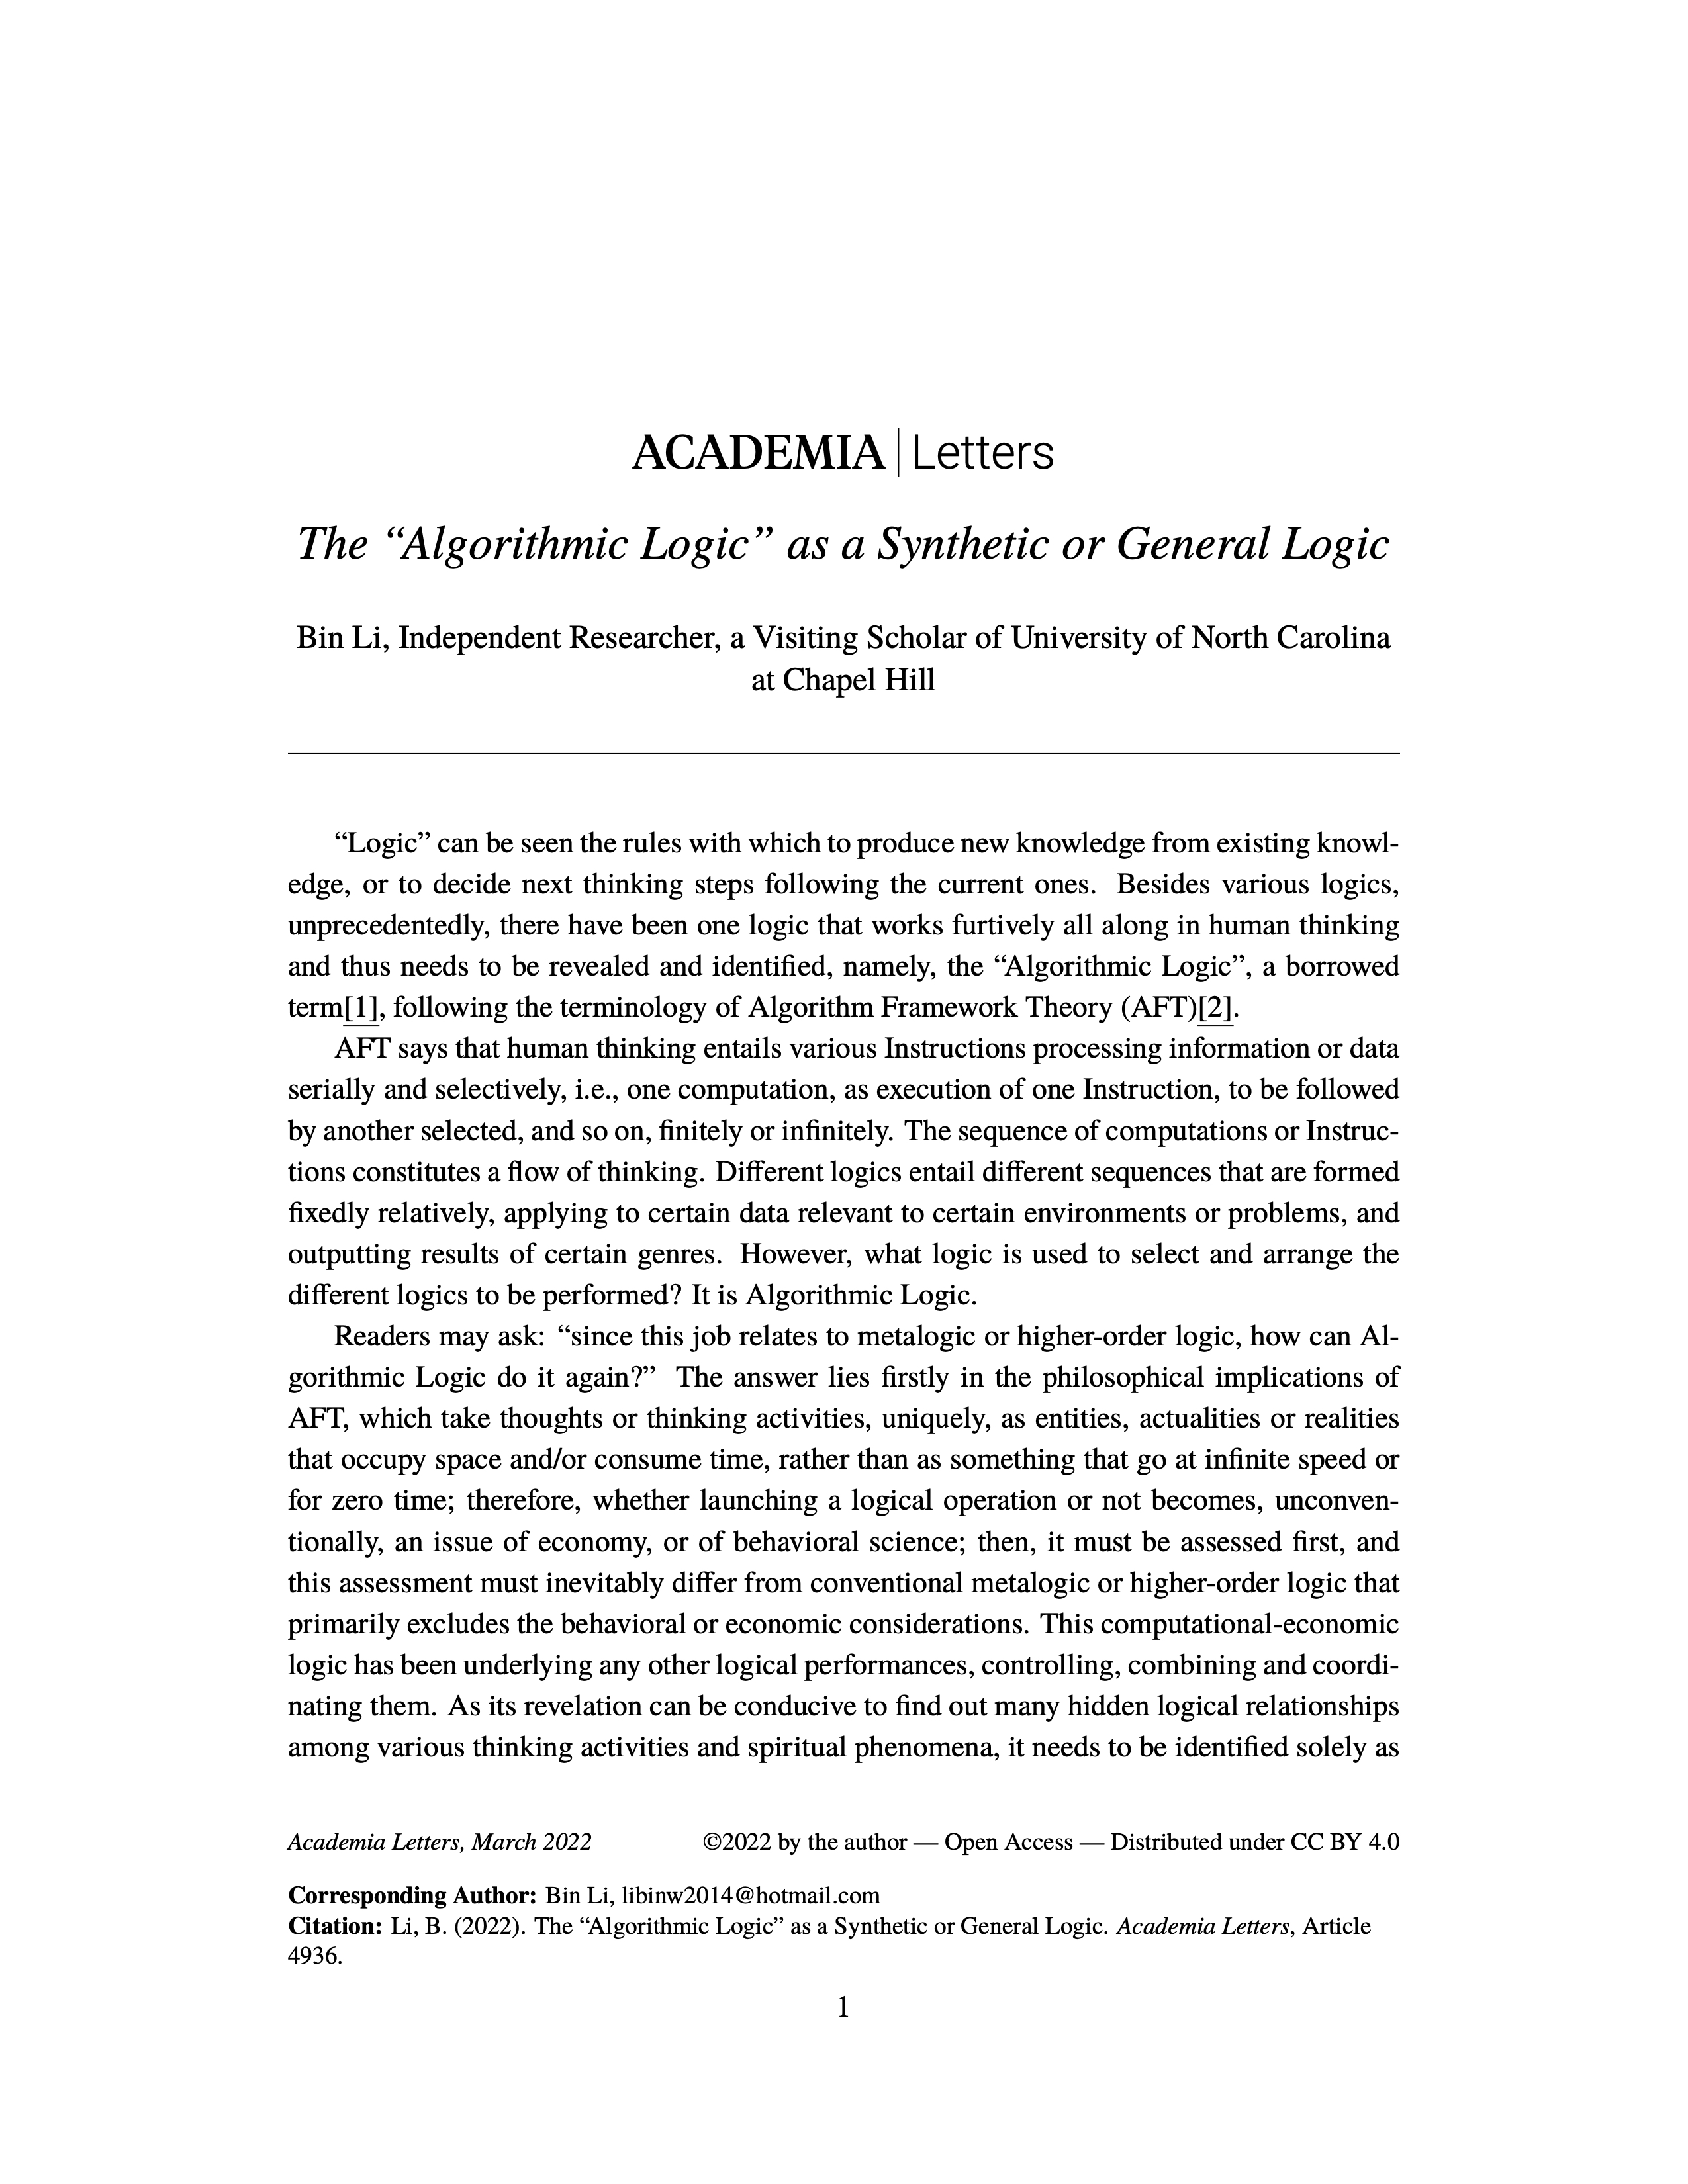 The “Algorithmic Logic” as a Synthetic or General Logic